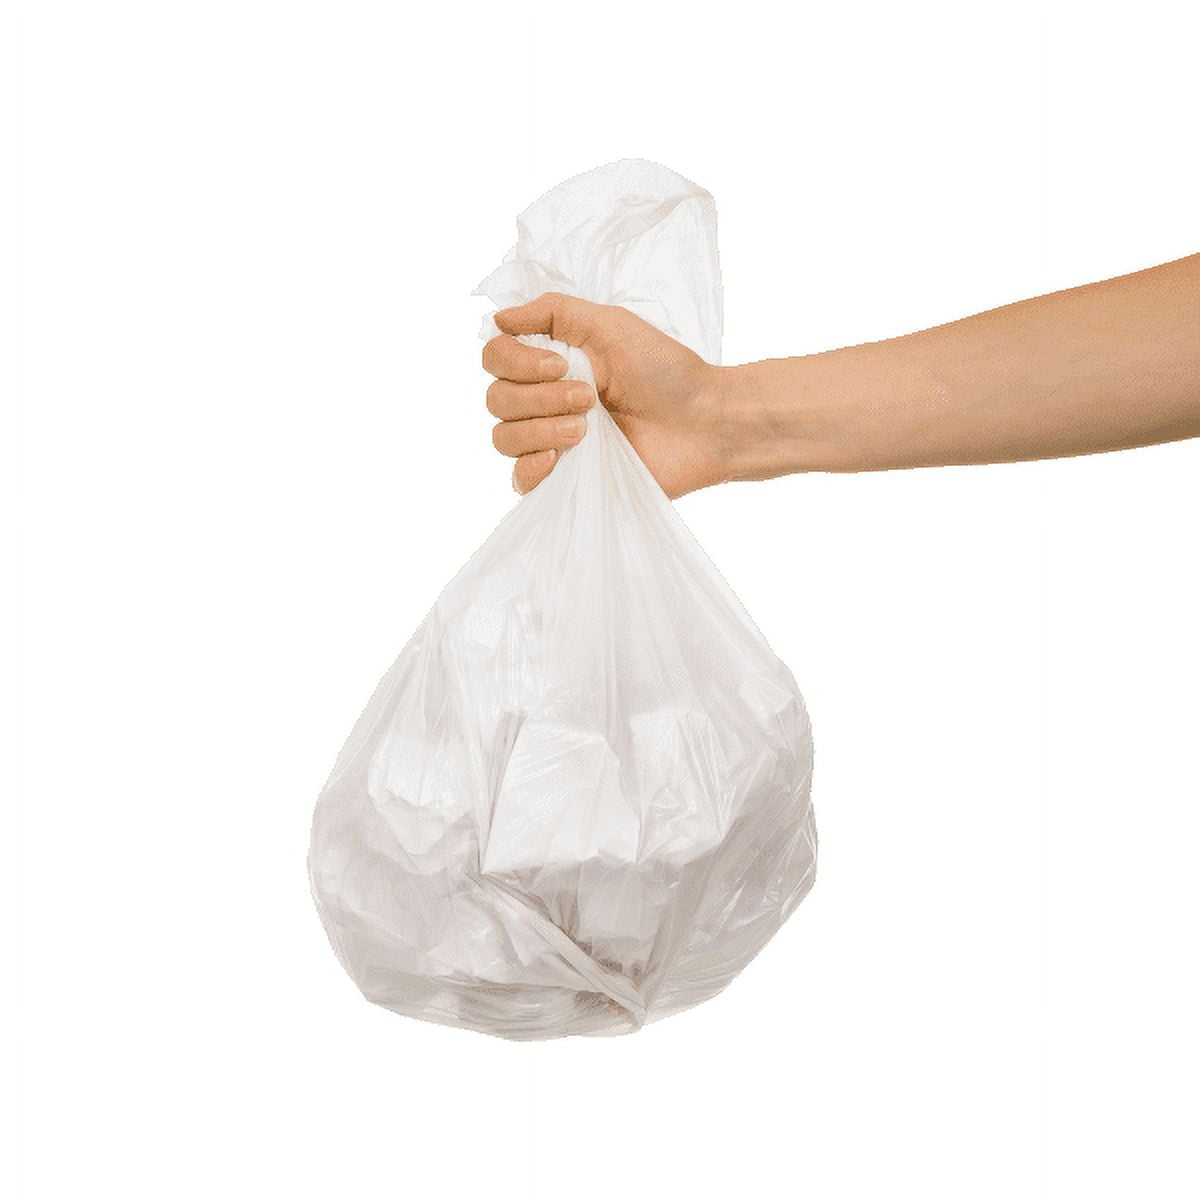 10 Gallon Trash Bags 10 Gal Garbage Bags Can Liners - 24 x 33 6 Micron  BLACK 1000ct